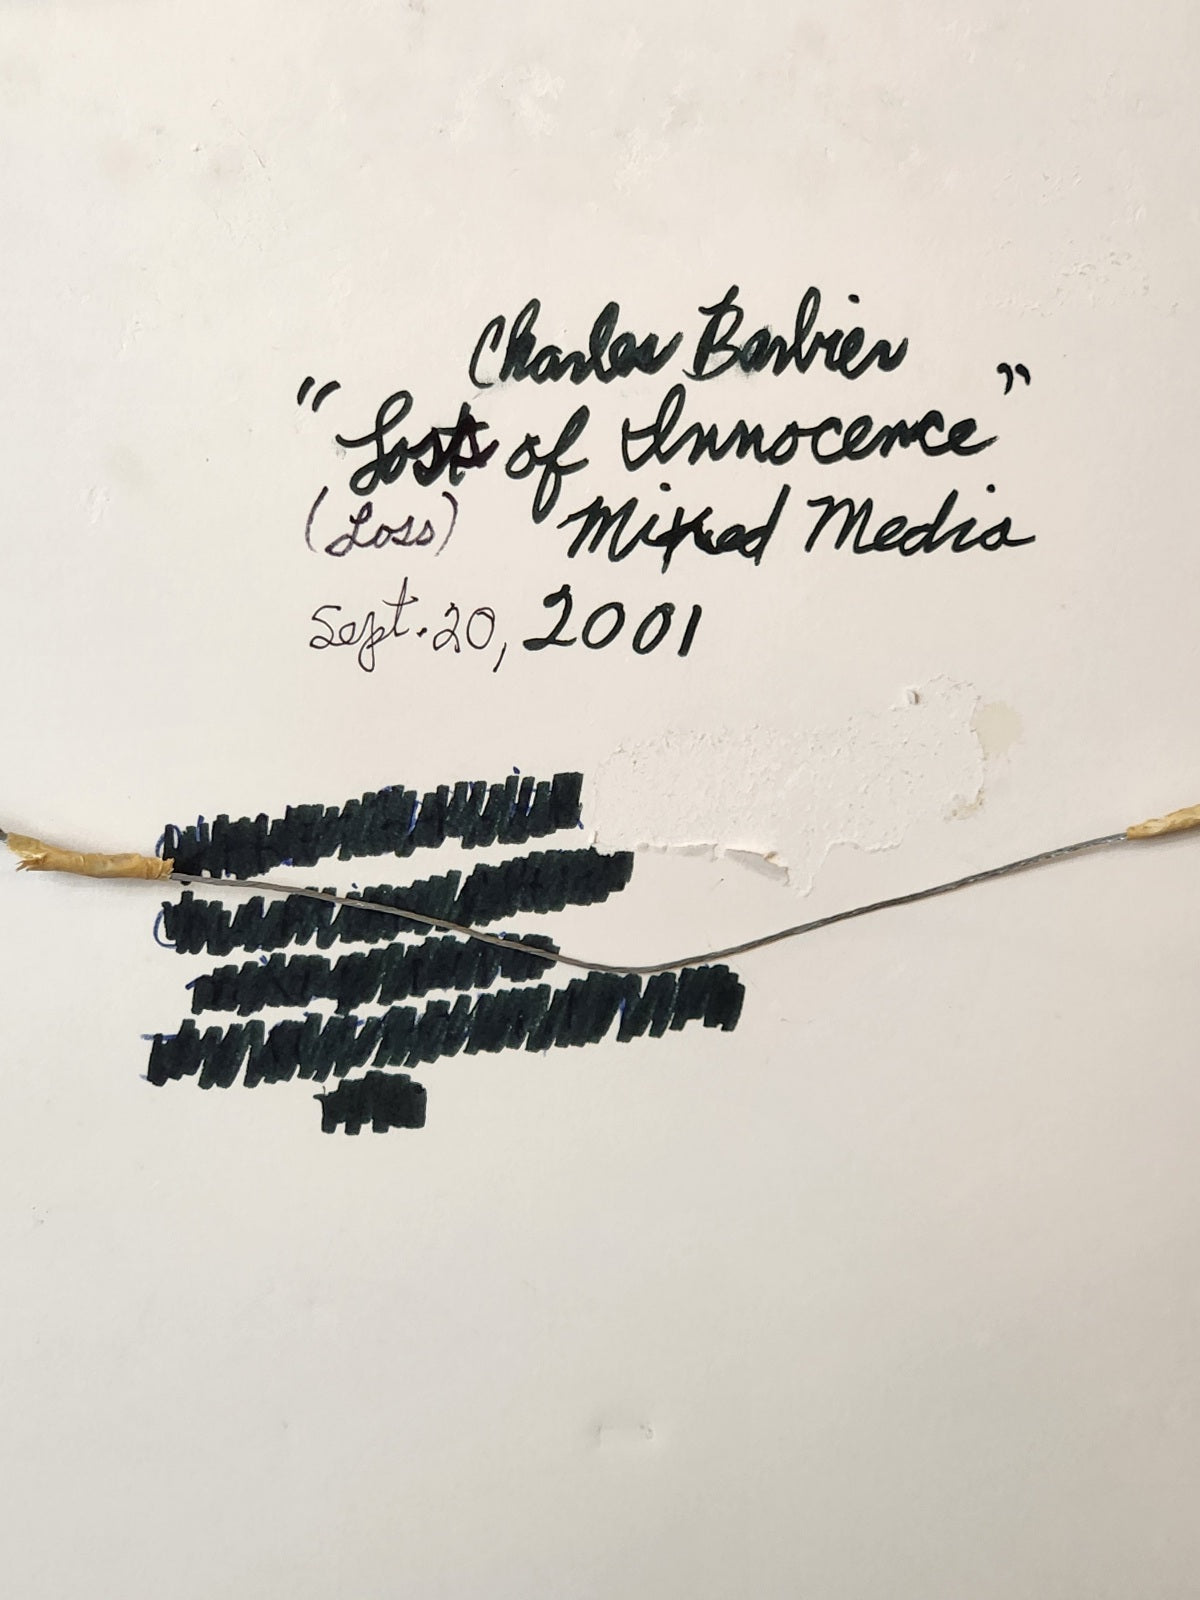 Loss of Innocence by Charles Barbier (signed 9 days after 9/11/2001), Mixed Media